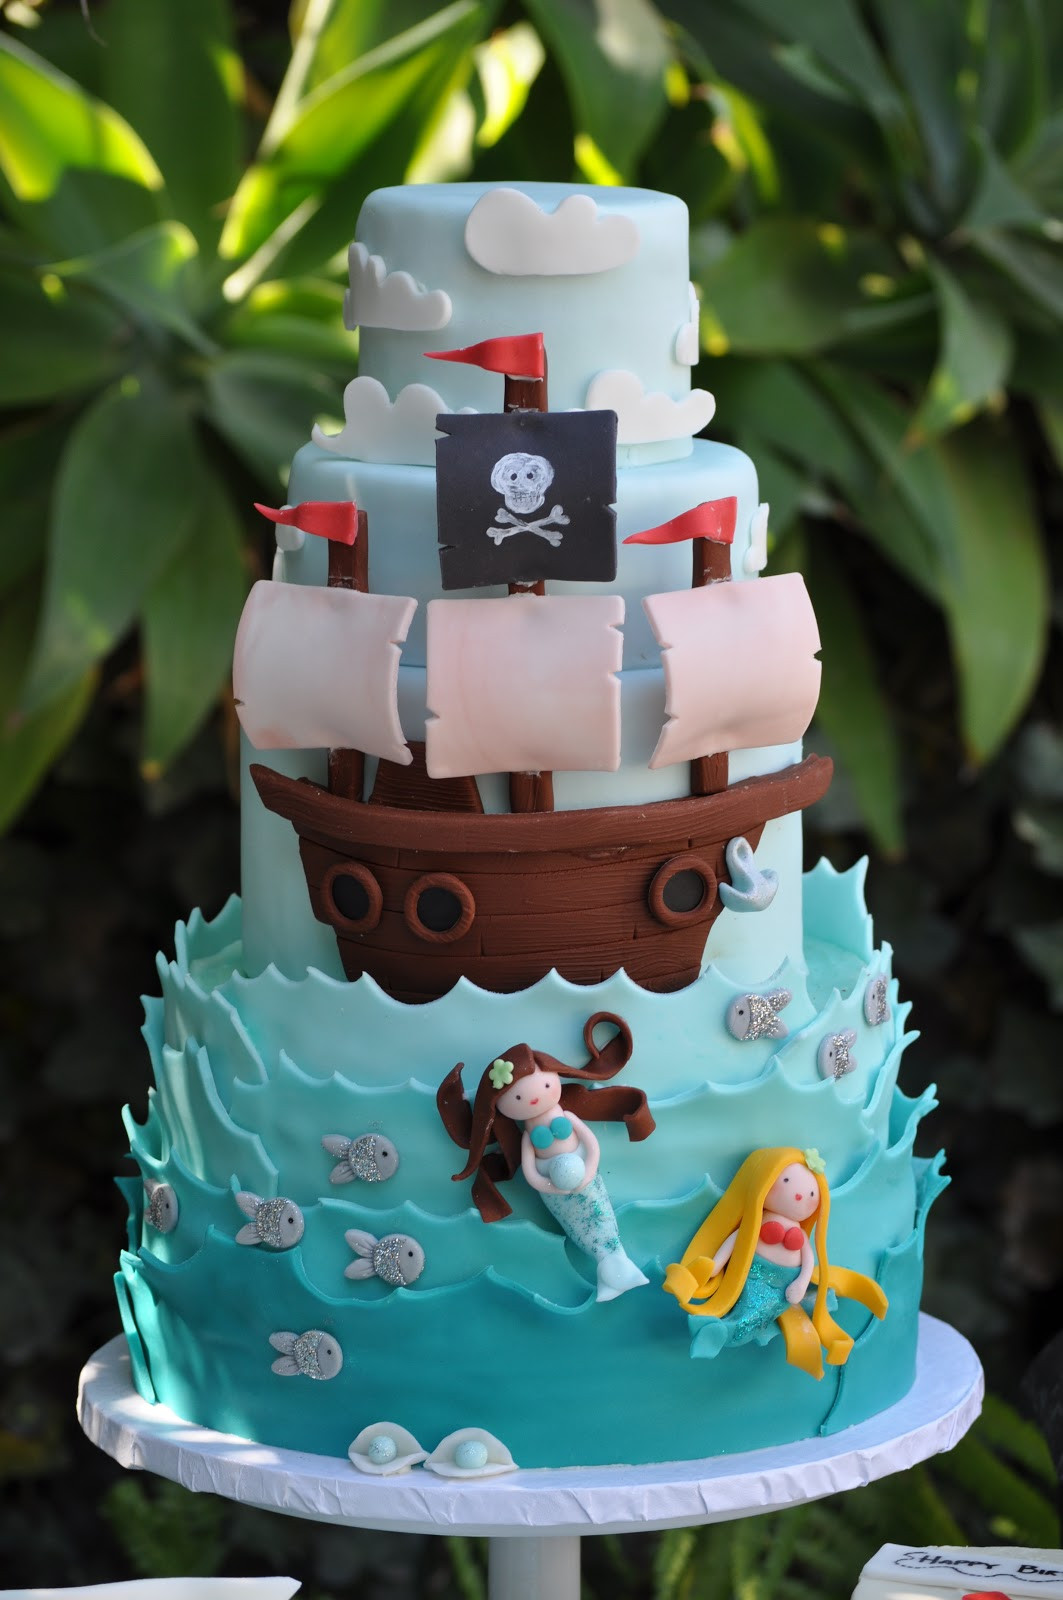 Pirate And Mermaid Party Ideas
 A Pirate and Mermaid Party